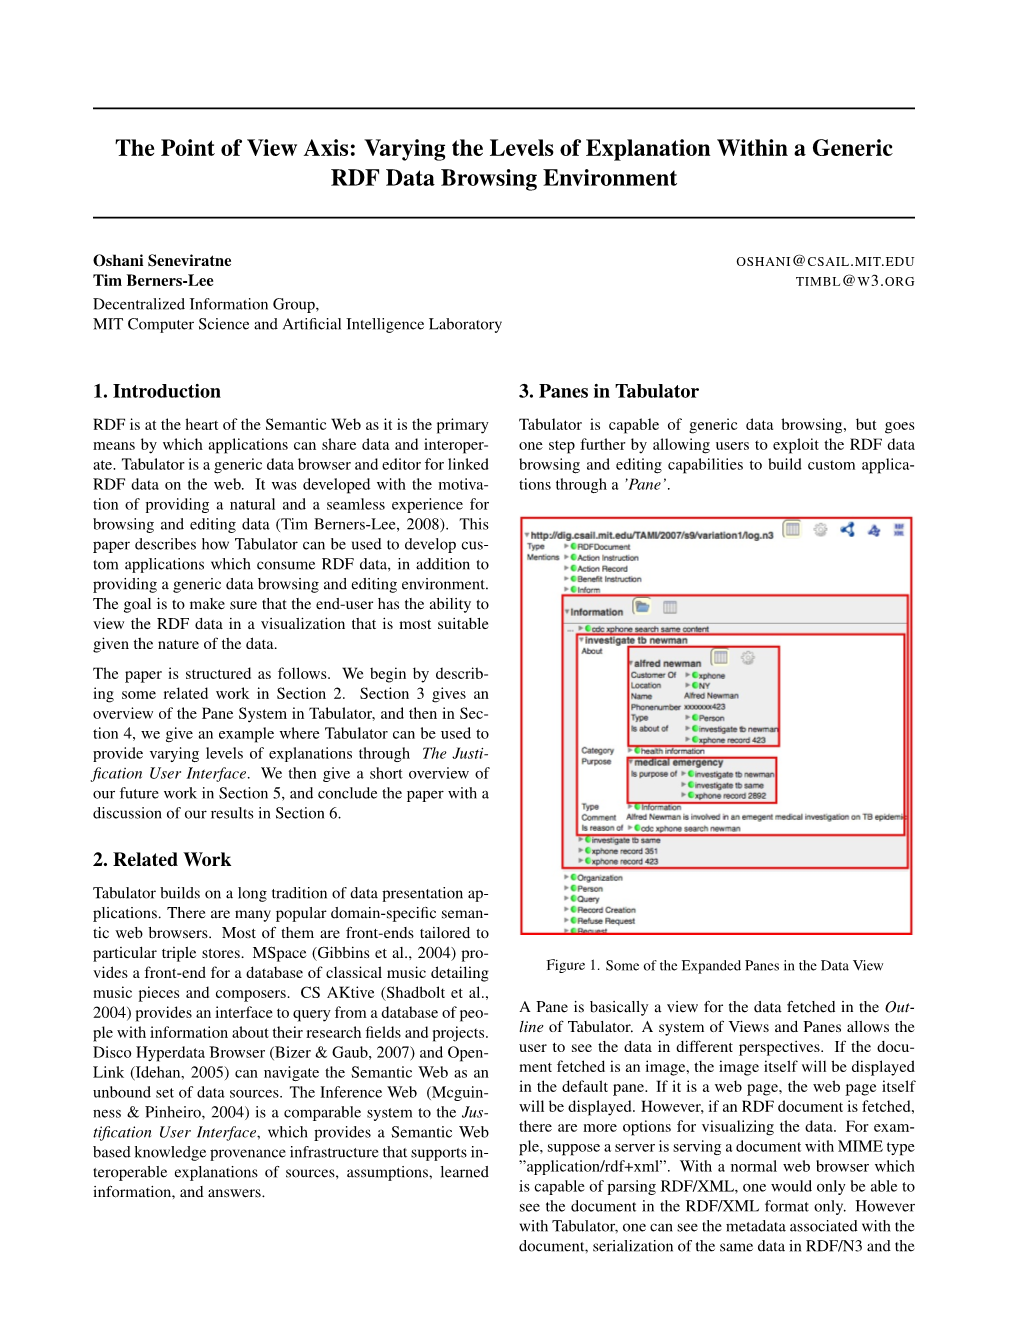 The Point of View Axis: Varying the Levels of Explanation Within a Generic RDF Data Browsing Environment